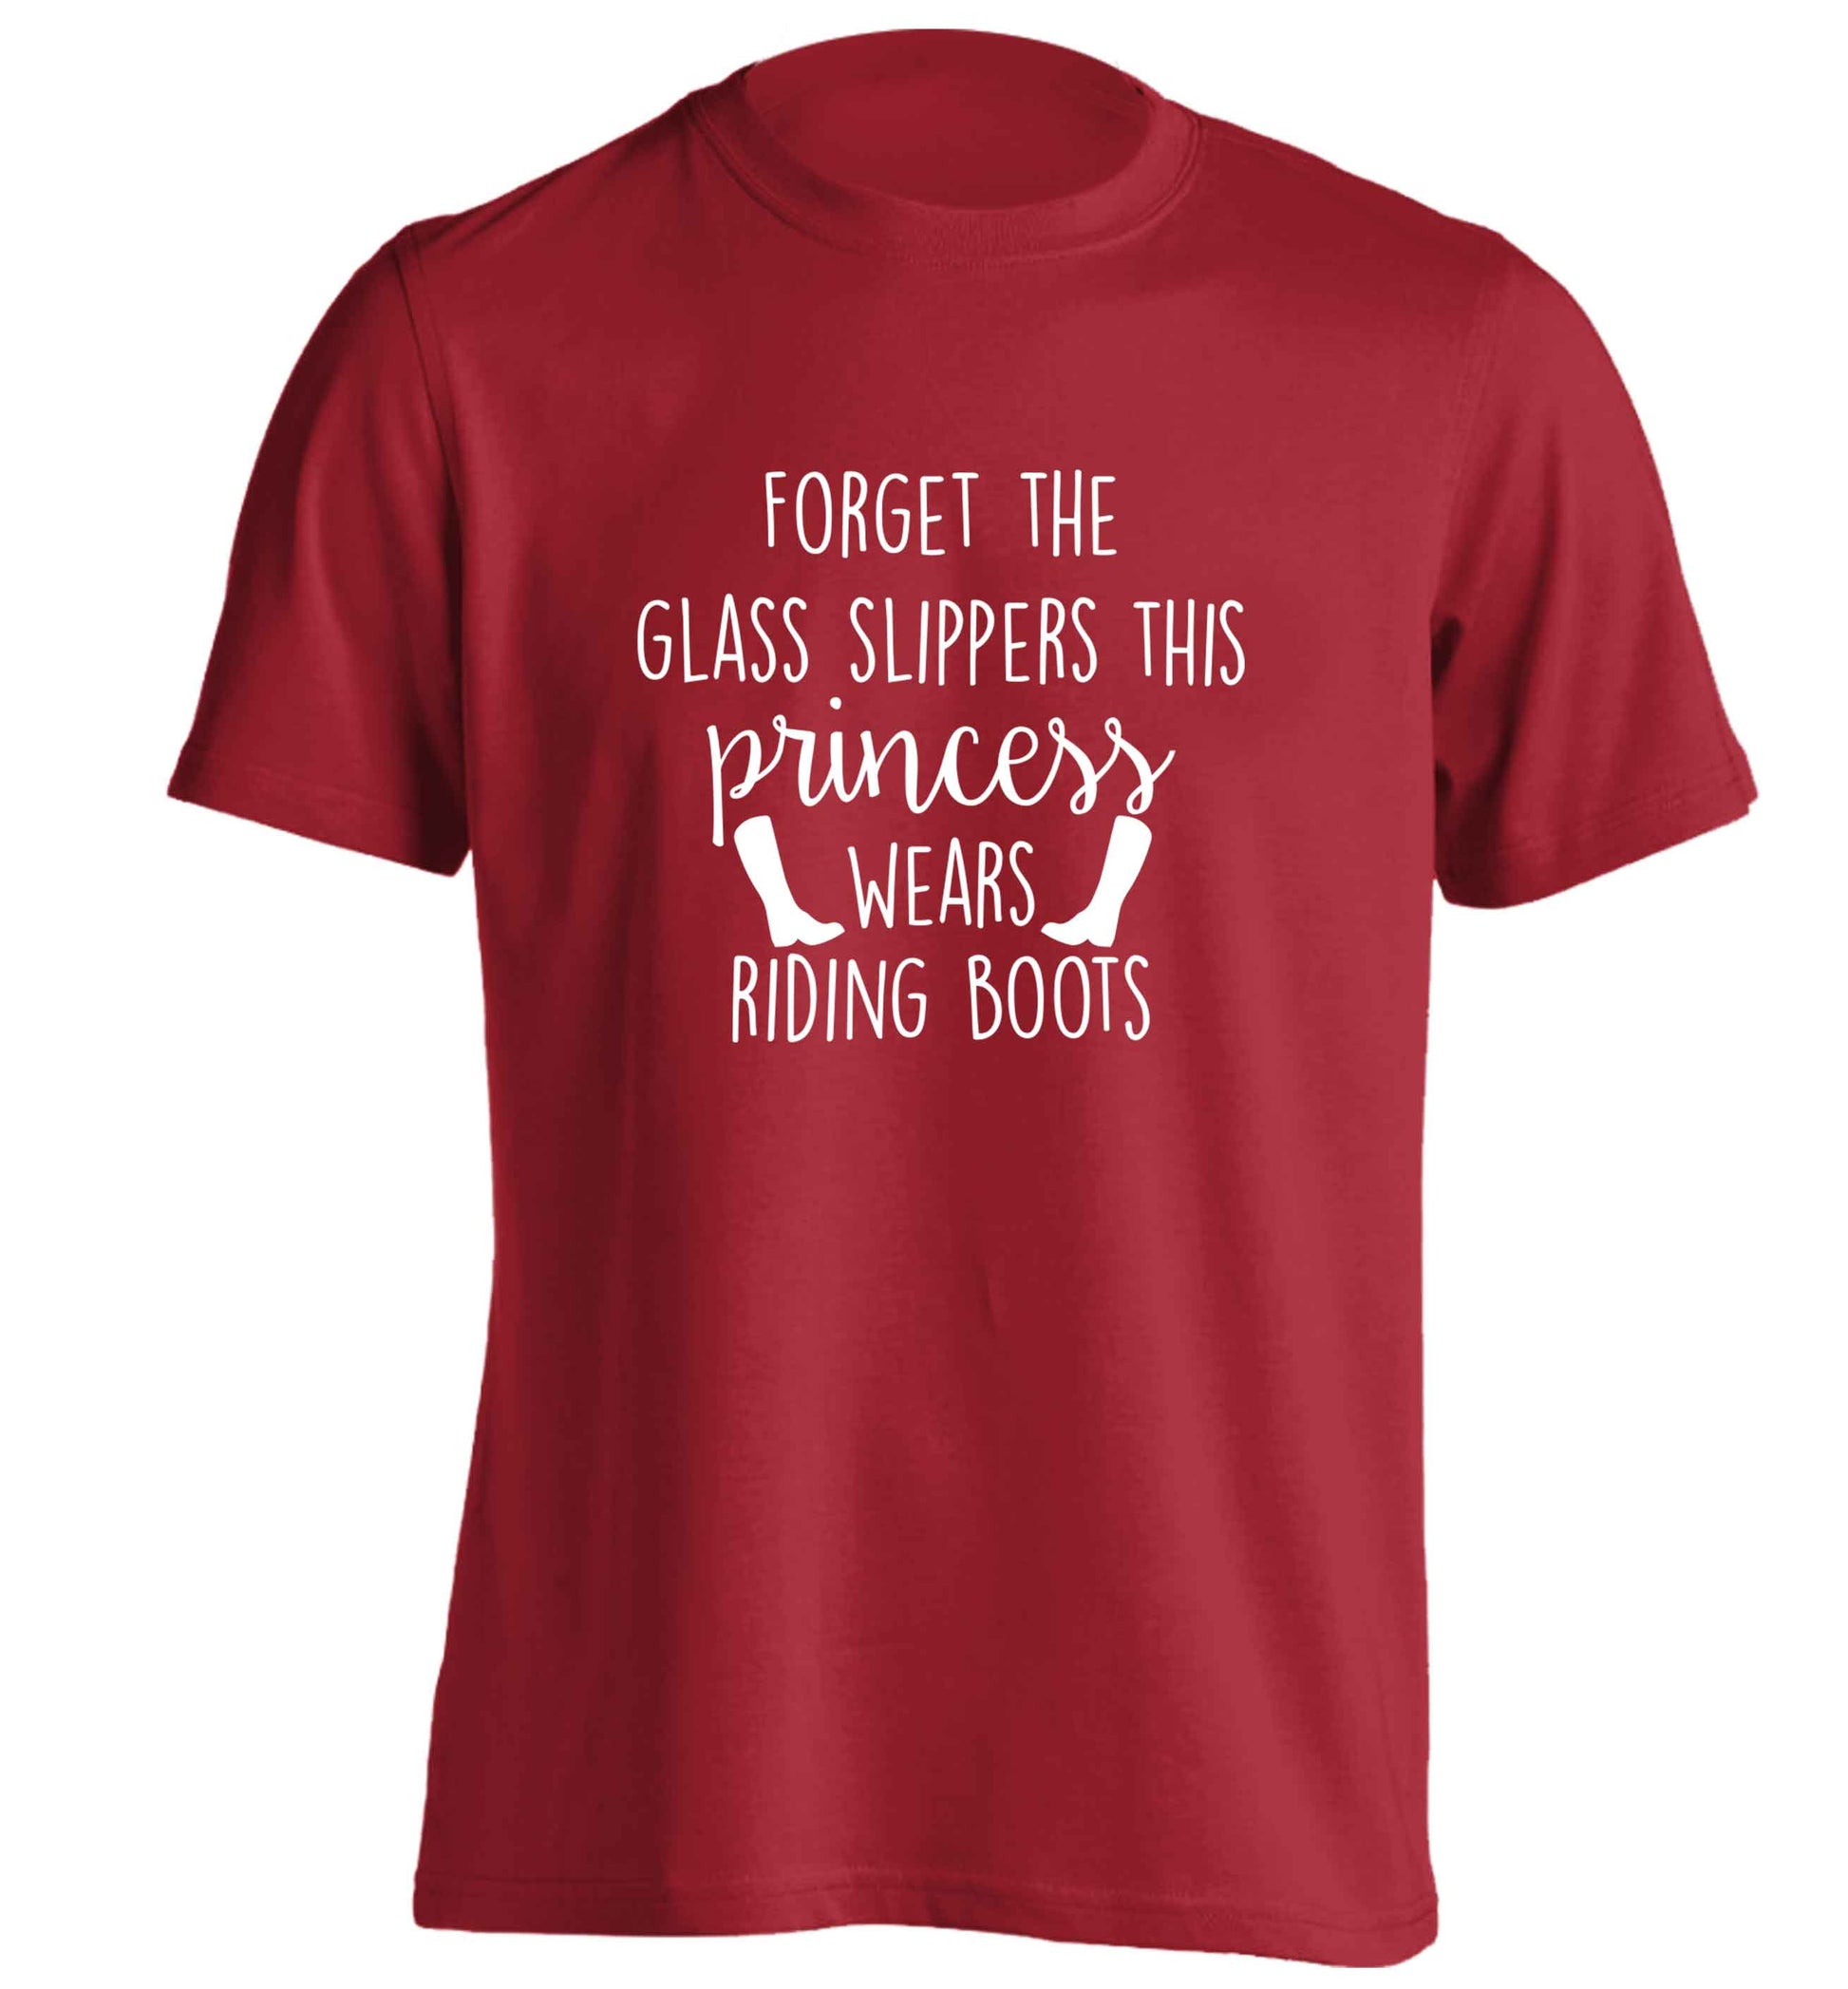 Forget the glass slippers this princess wears riding boots adults unisex red Tshirt 2XL